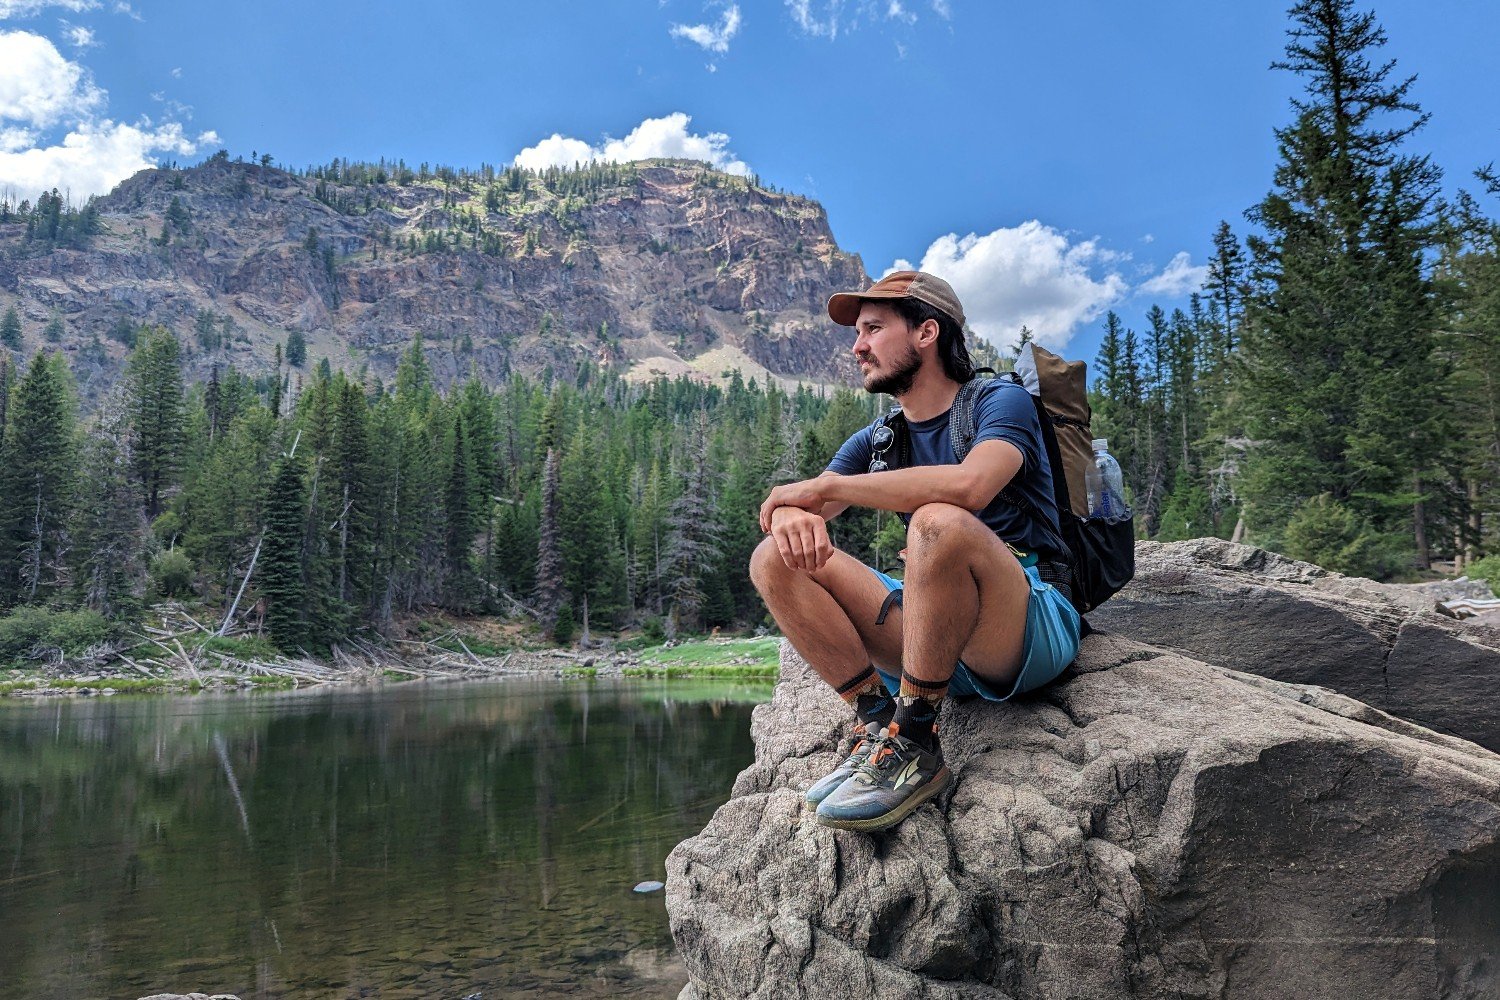 A hiker wearing Altra Lone Peak 7 trail running shoes. He's sitting on a rock in front of a lake looking out into the distance, and there are pine trees and a mountain in the background